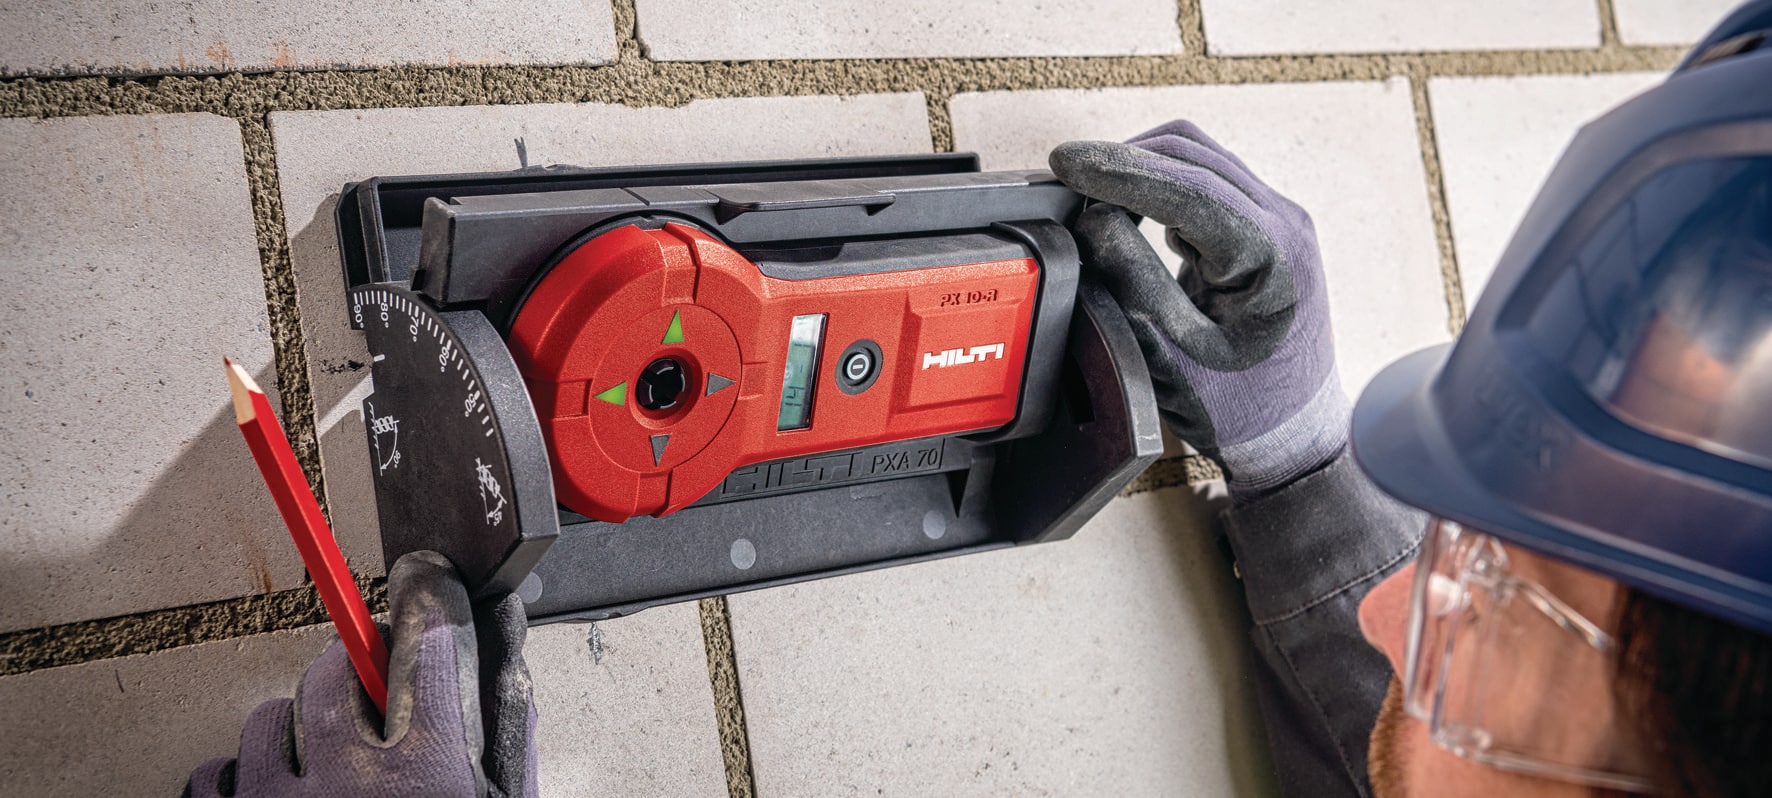 PX 10 Transpointer - Concrete scanners and sensors - Hilti GB